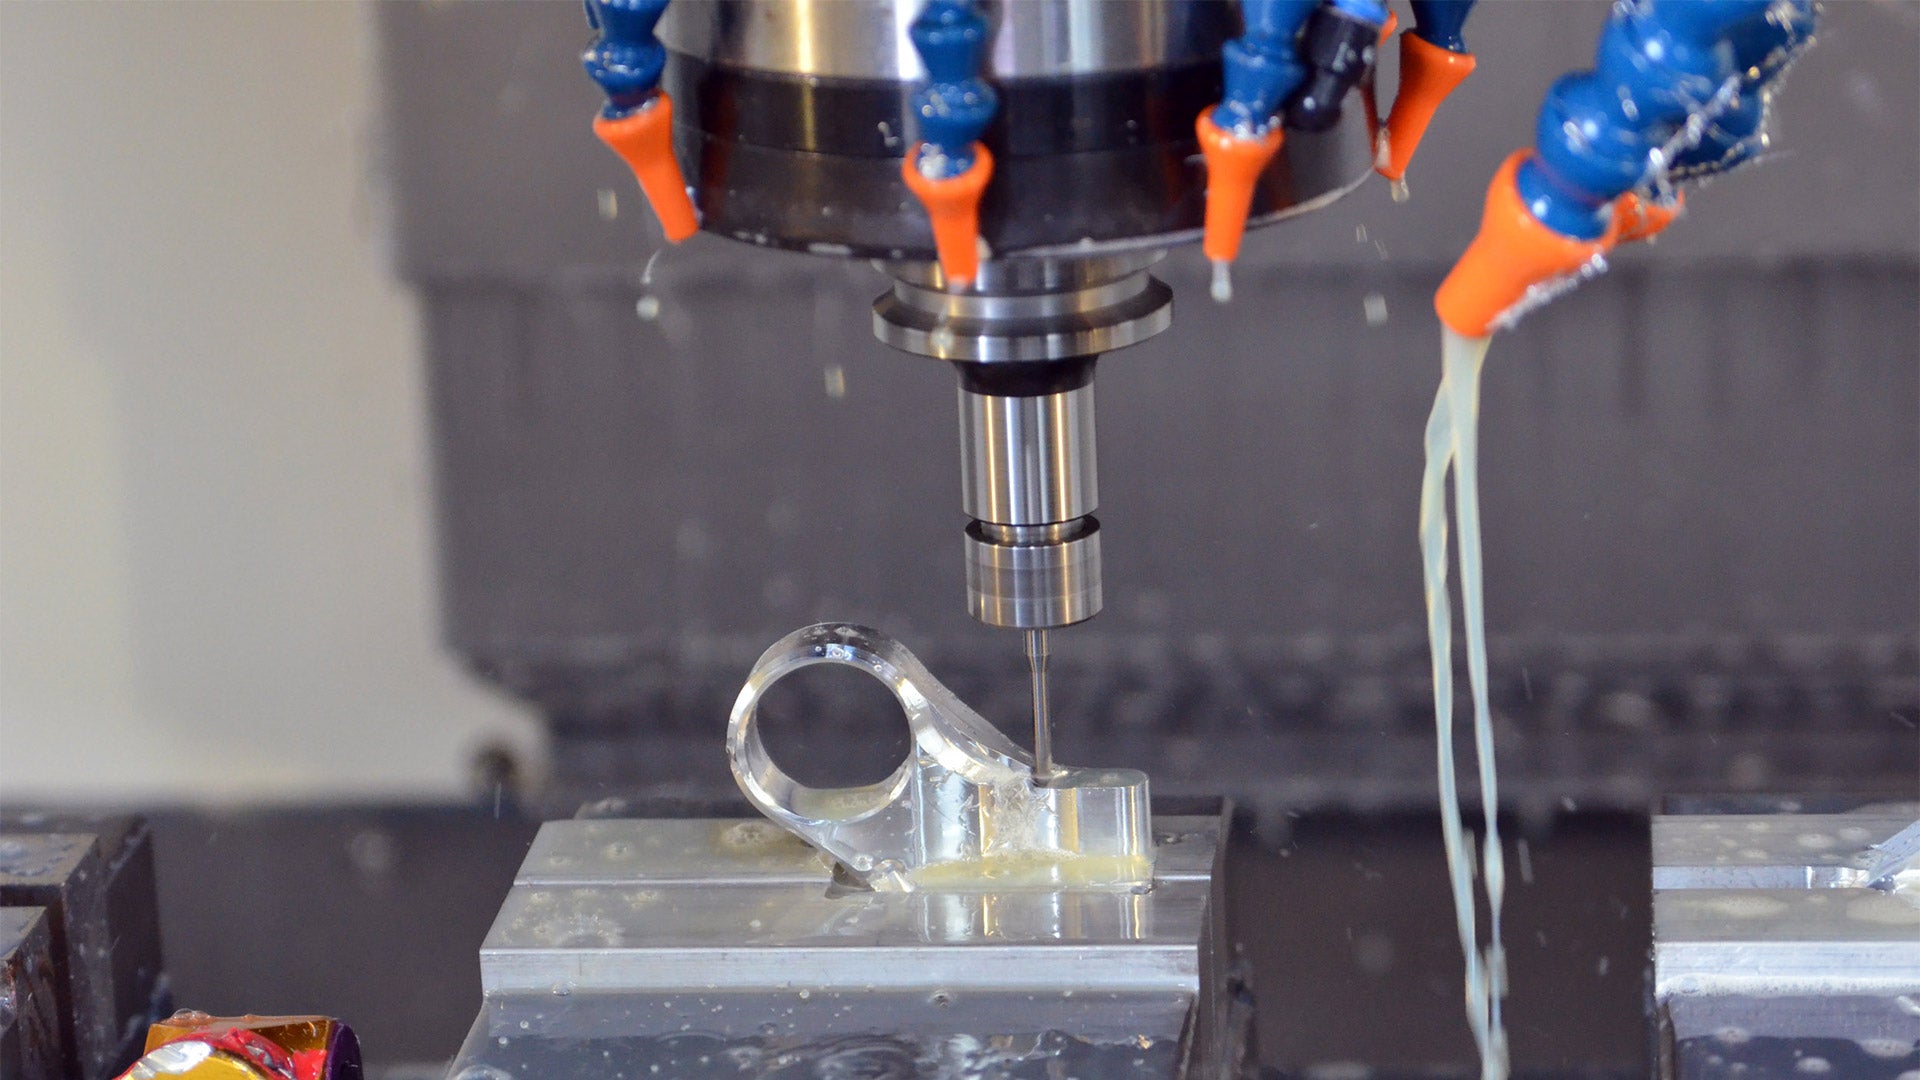 Machining a functional prototype for real world testing.